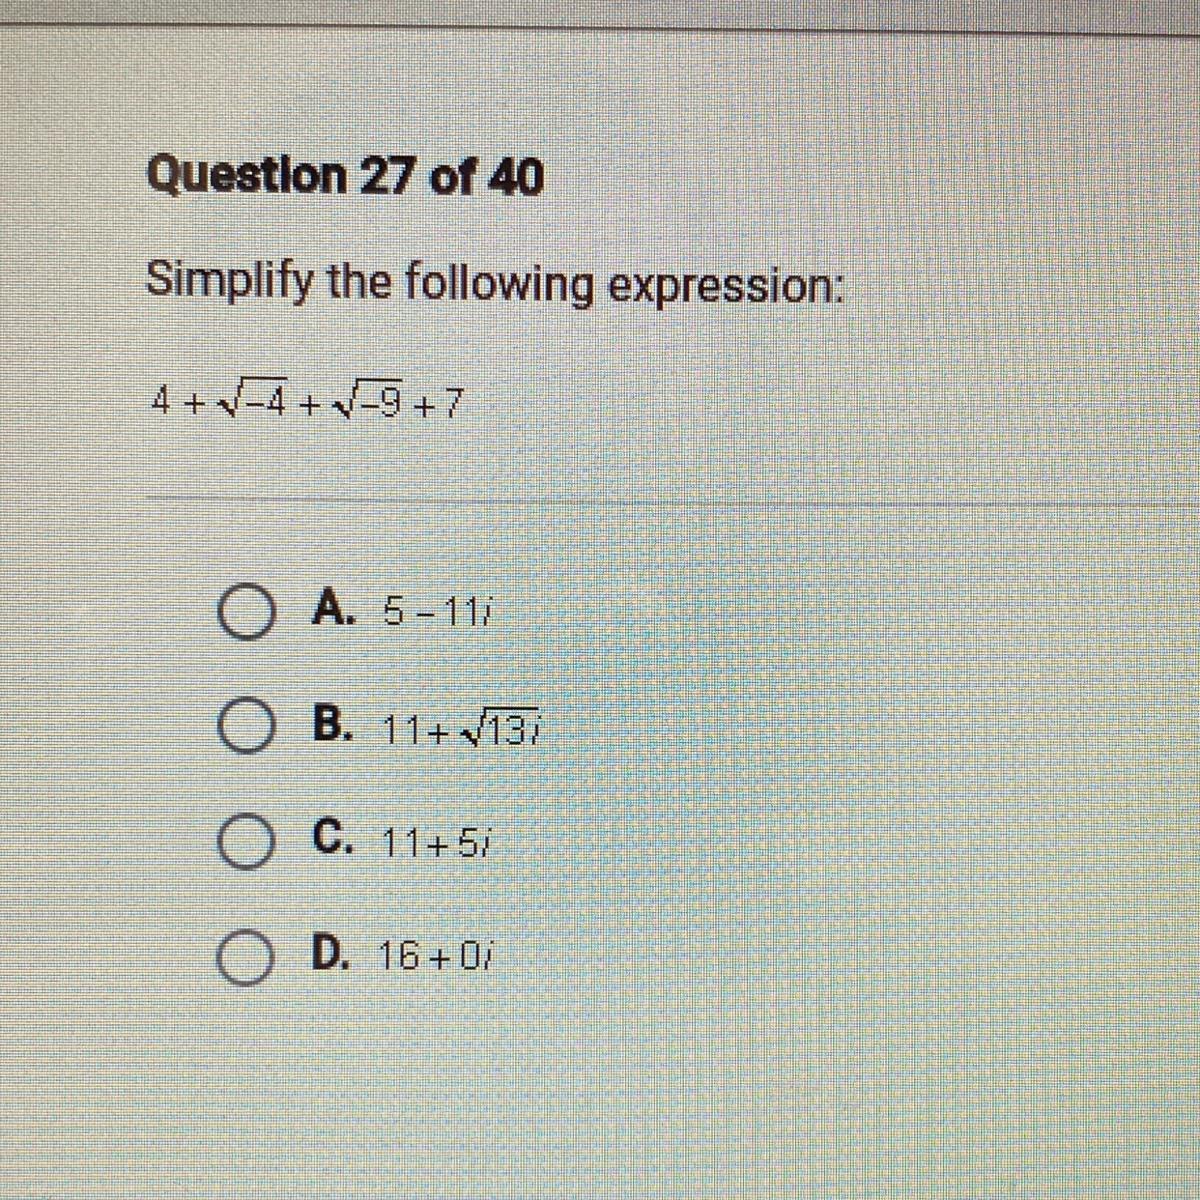 Need Help Quick Just The Answer